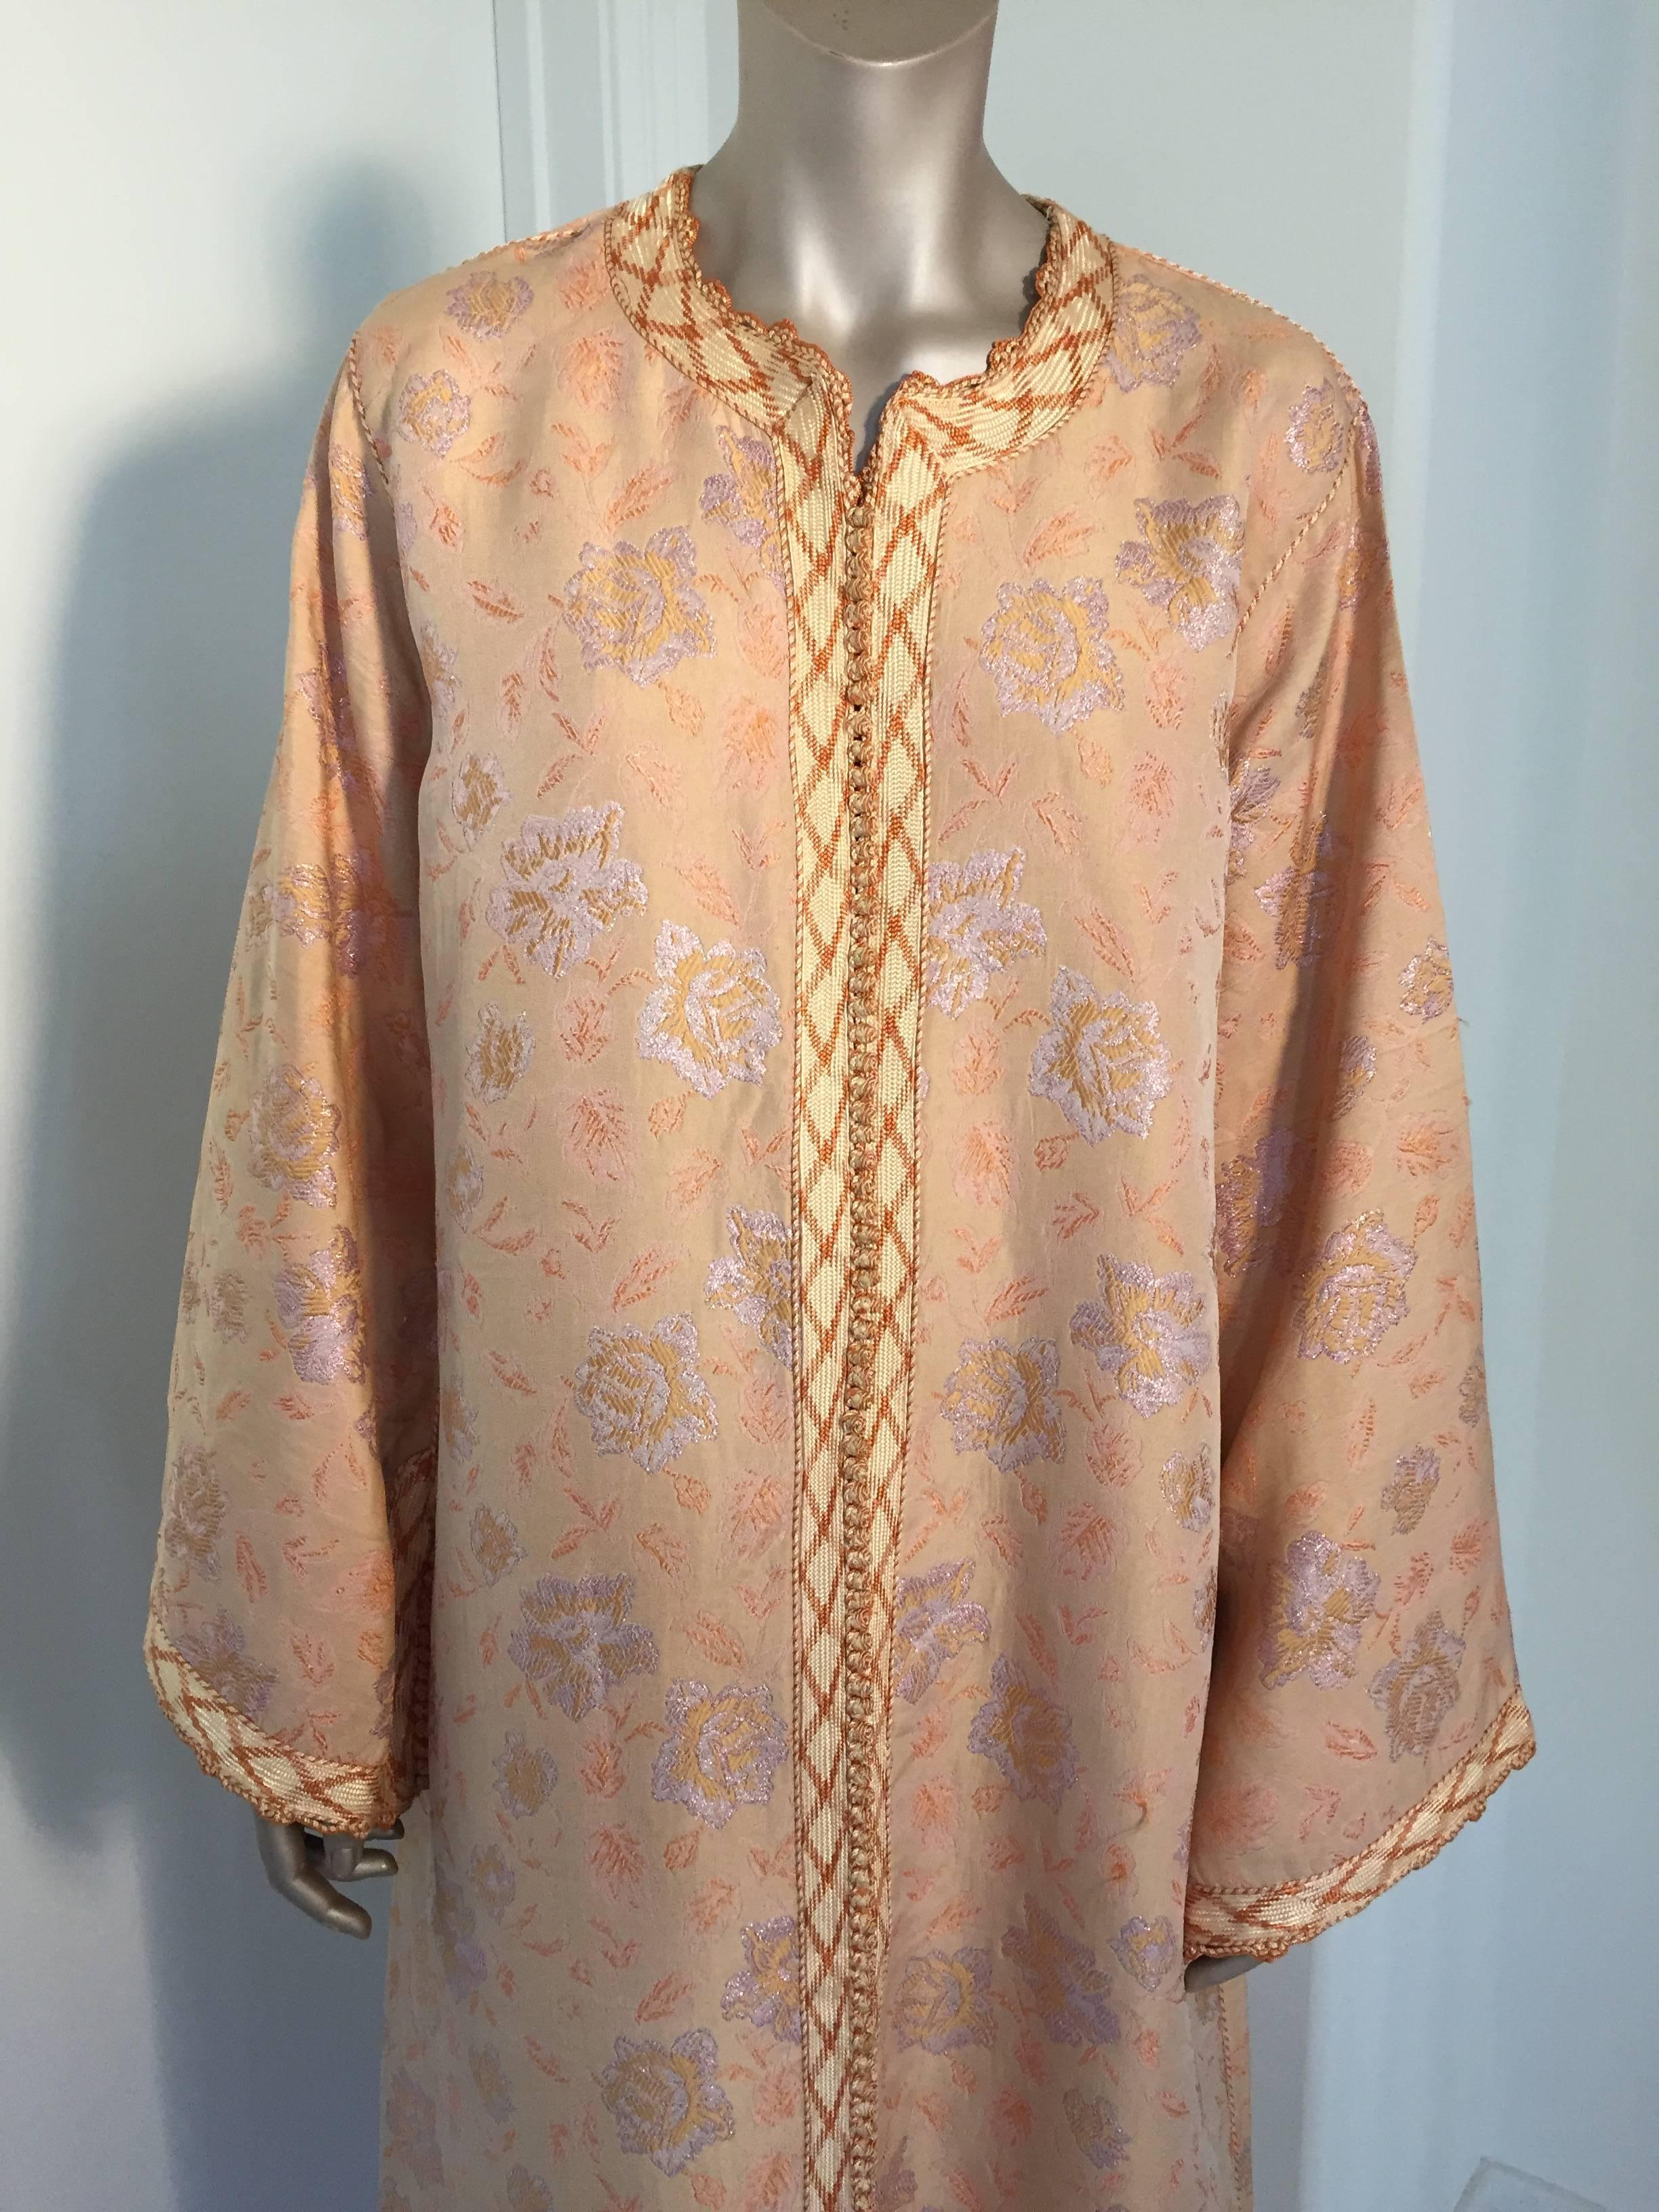 Elegant exotic Moroccan brocade caftan vintage maxi dress gown, circa 1970s.
This long maxi dress kaftan is  embellished entirely by hand.
One of a kind evening Moroccan Middle Eastern brocade gown.
The kaftan features a traditional neckline,